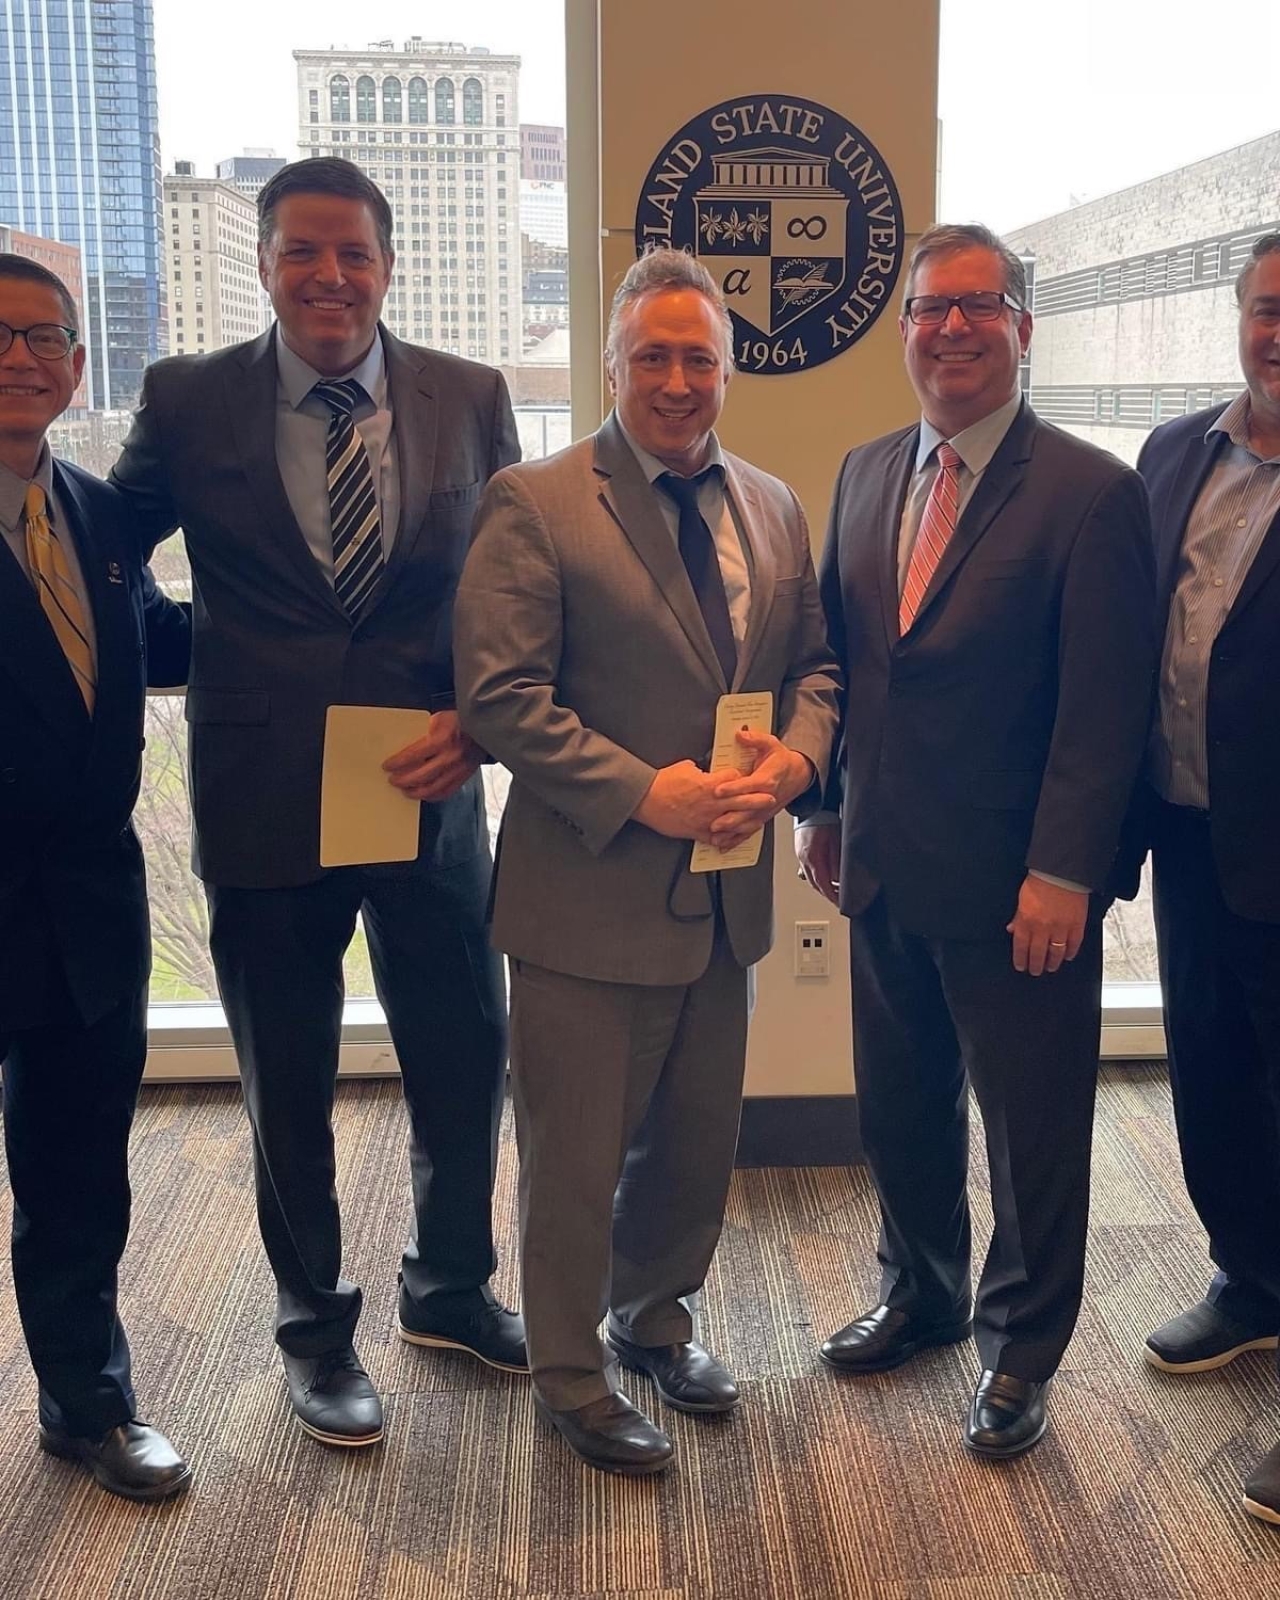 Rep. Brennan with Parma Councilman Mark Casselberry, County Councilman (now Parma Law Director) Scott Tuma, Parma Mayor Timothy DeGeeter, and others.